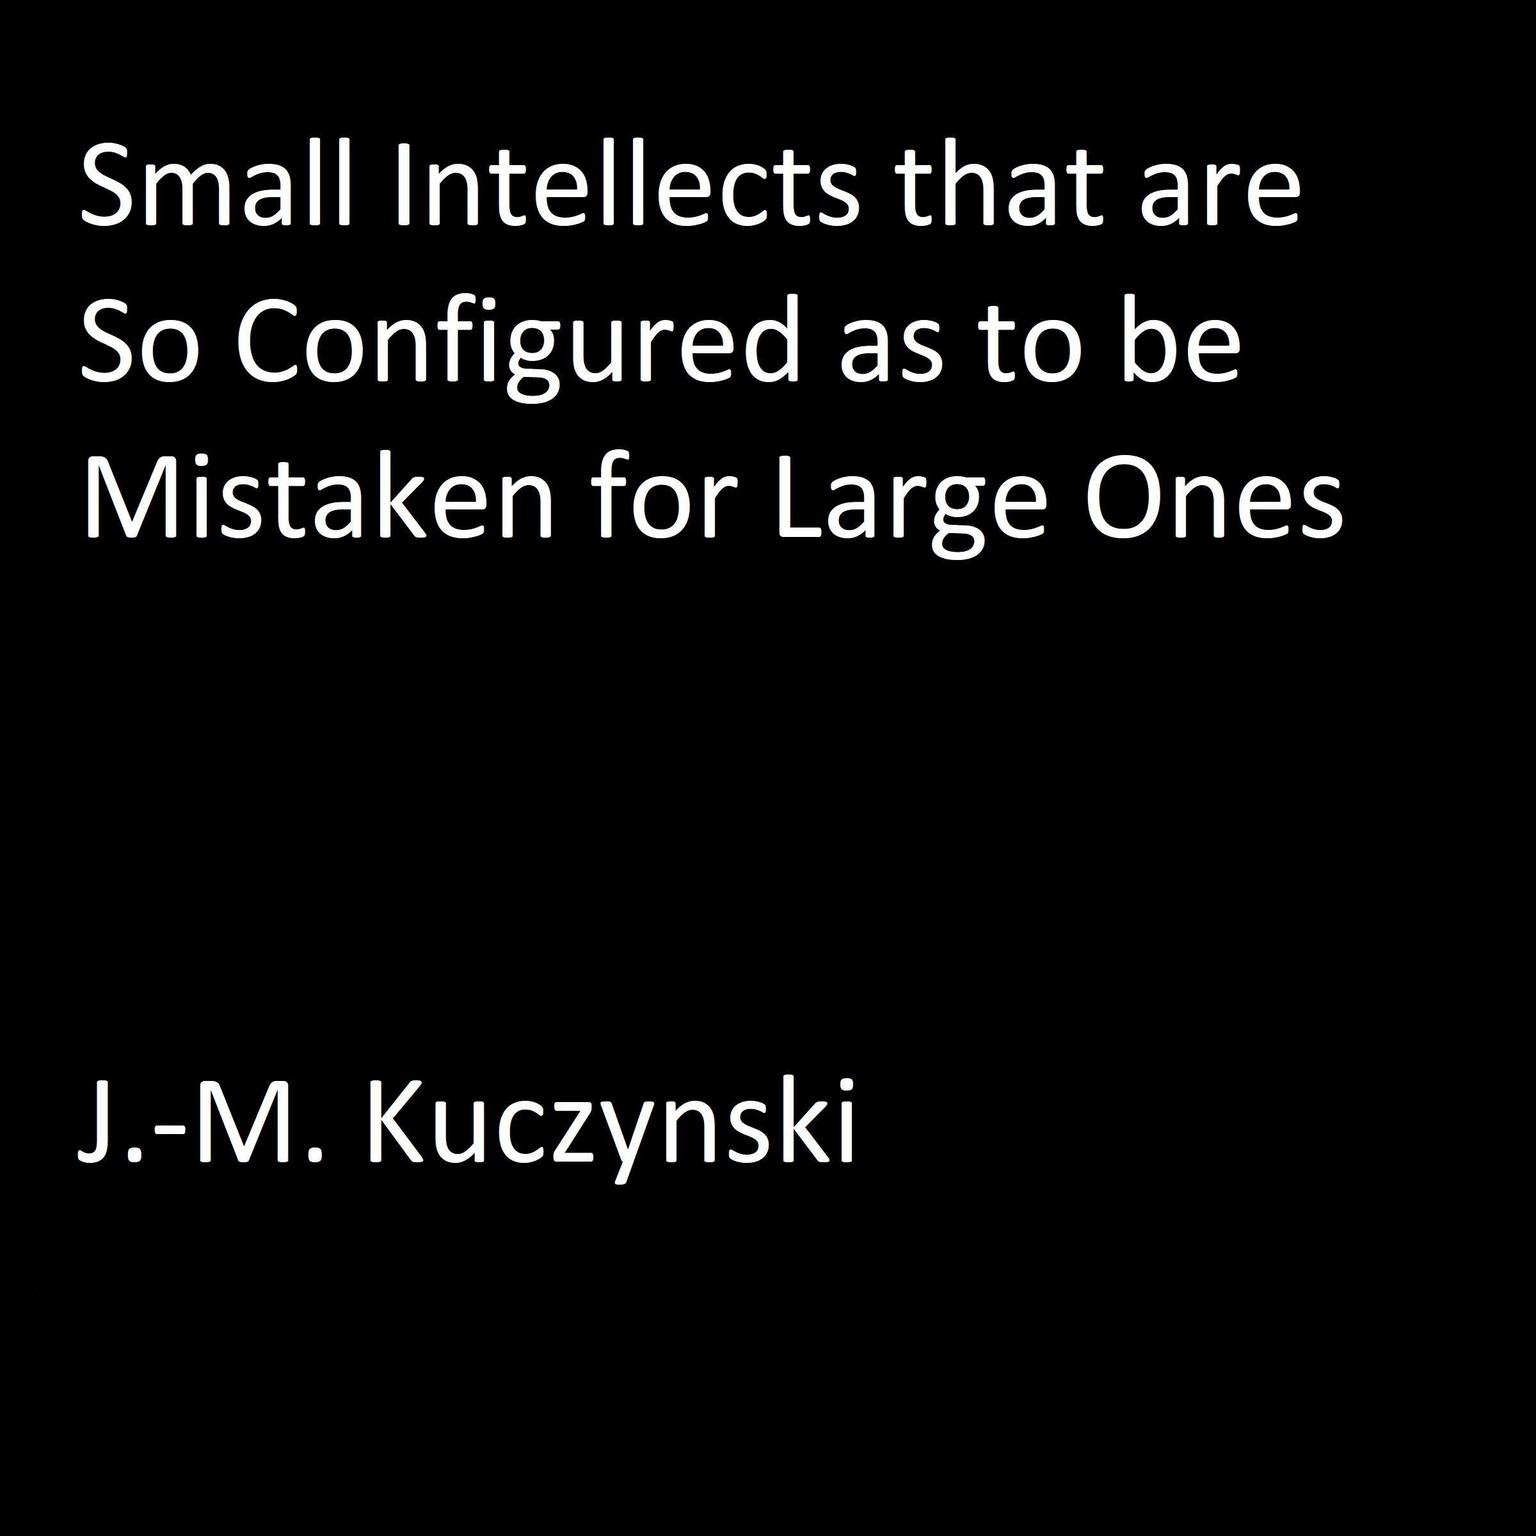 Small Intellects that are So Configured as to be Mistaken for Large Ones Audiobook, by J. M. Kuczynski